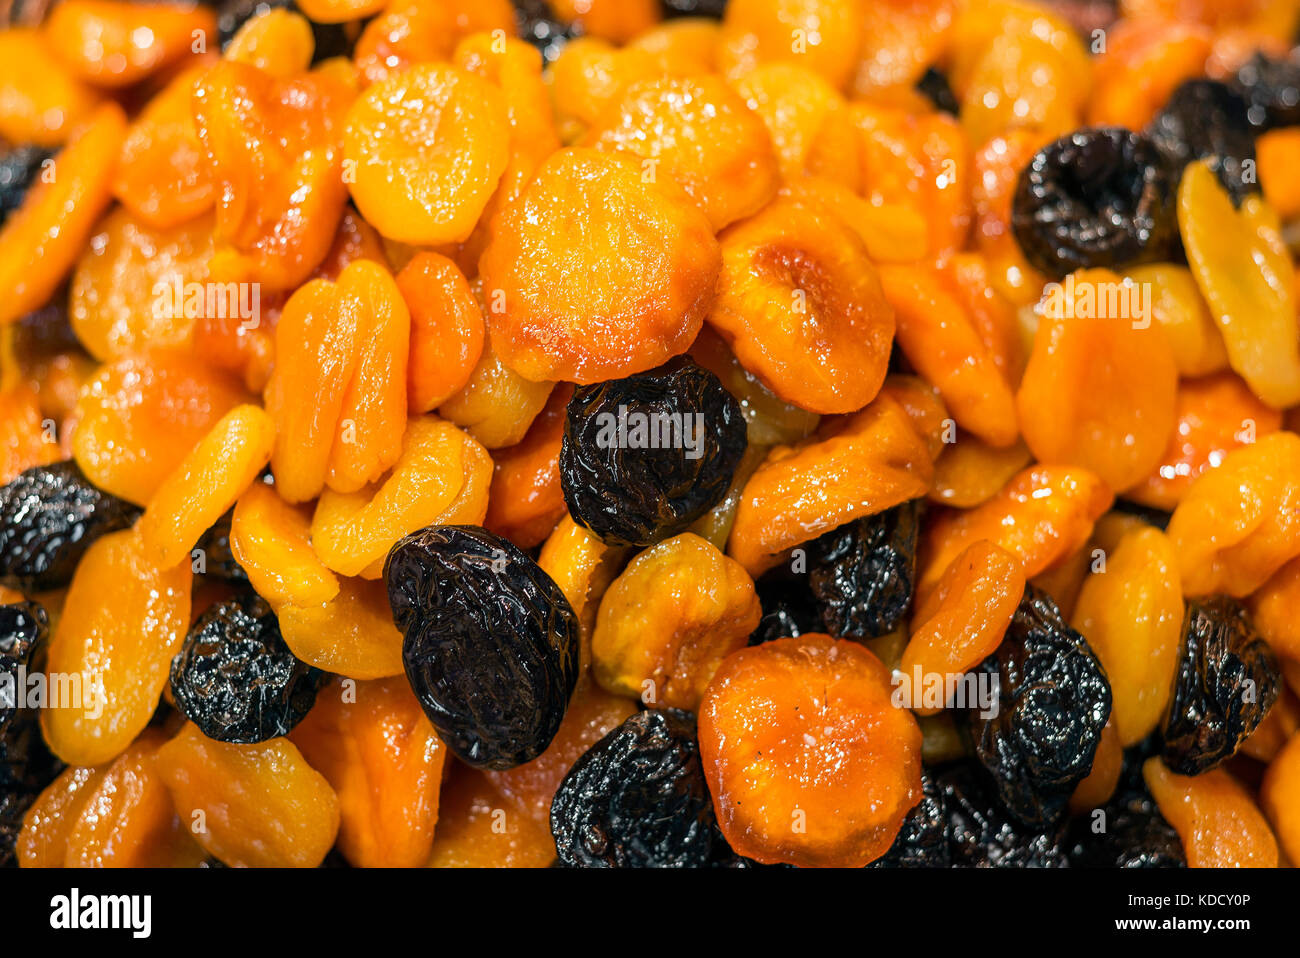 healthy natural honey glazed sundried dried apricot and prune fruit mix Stock Photo